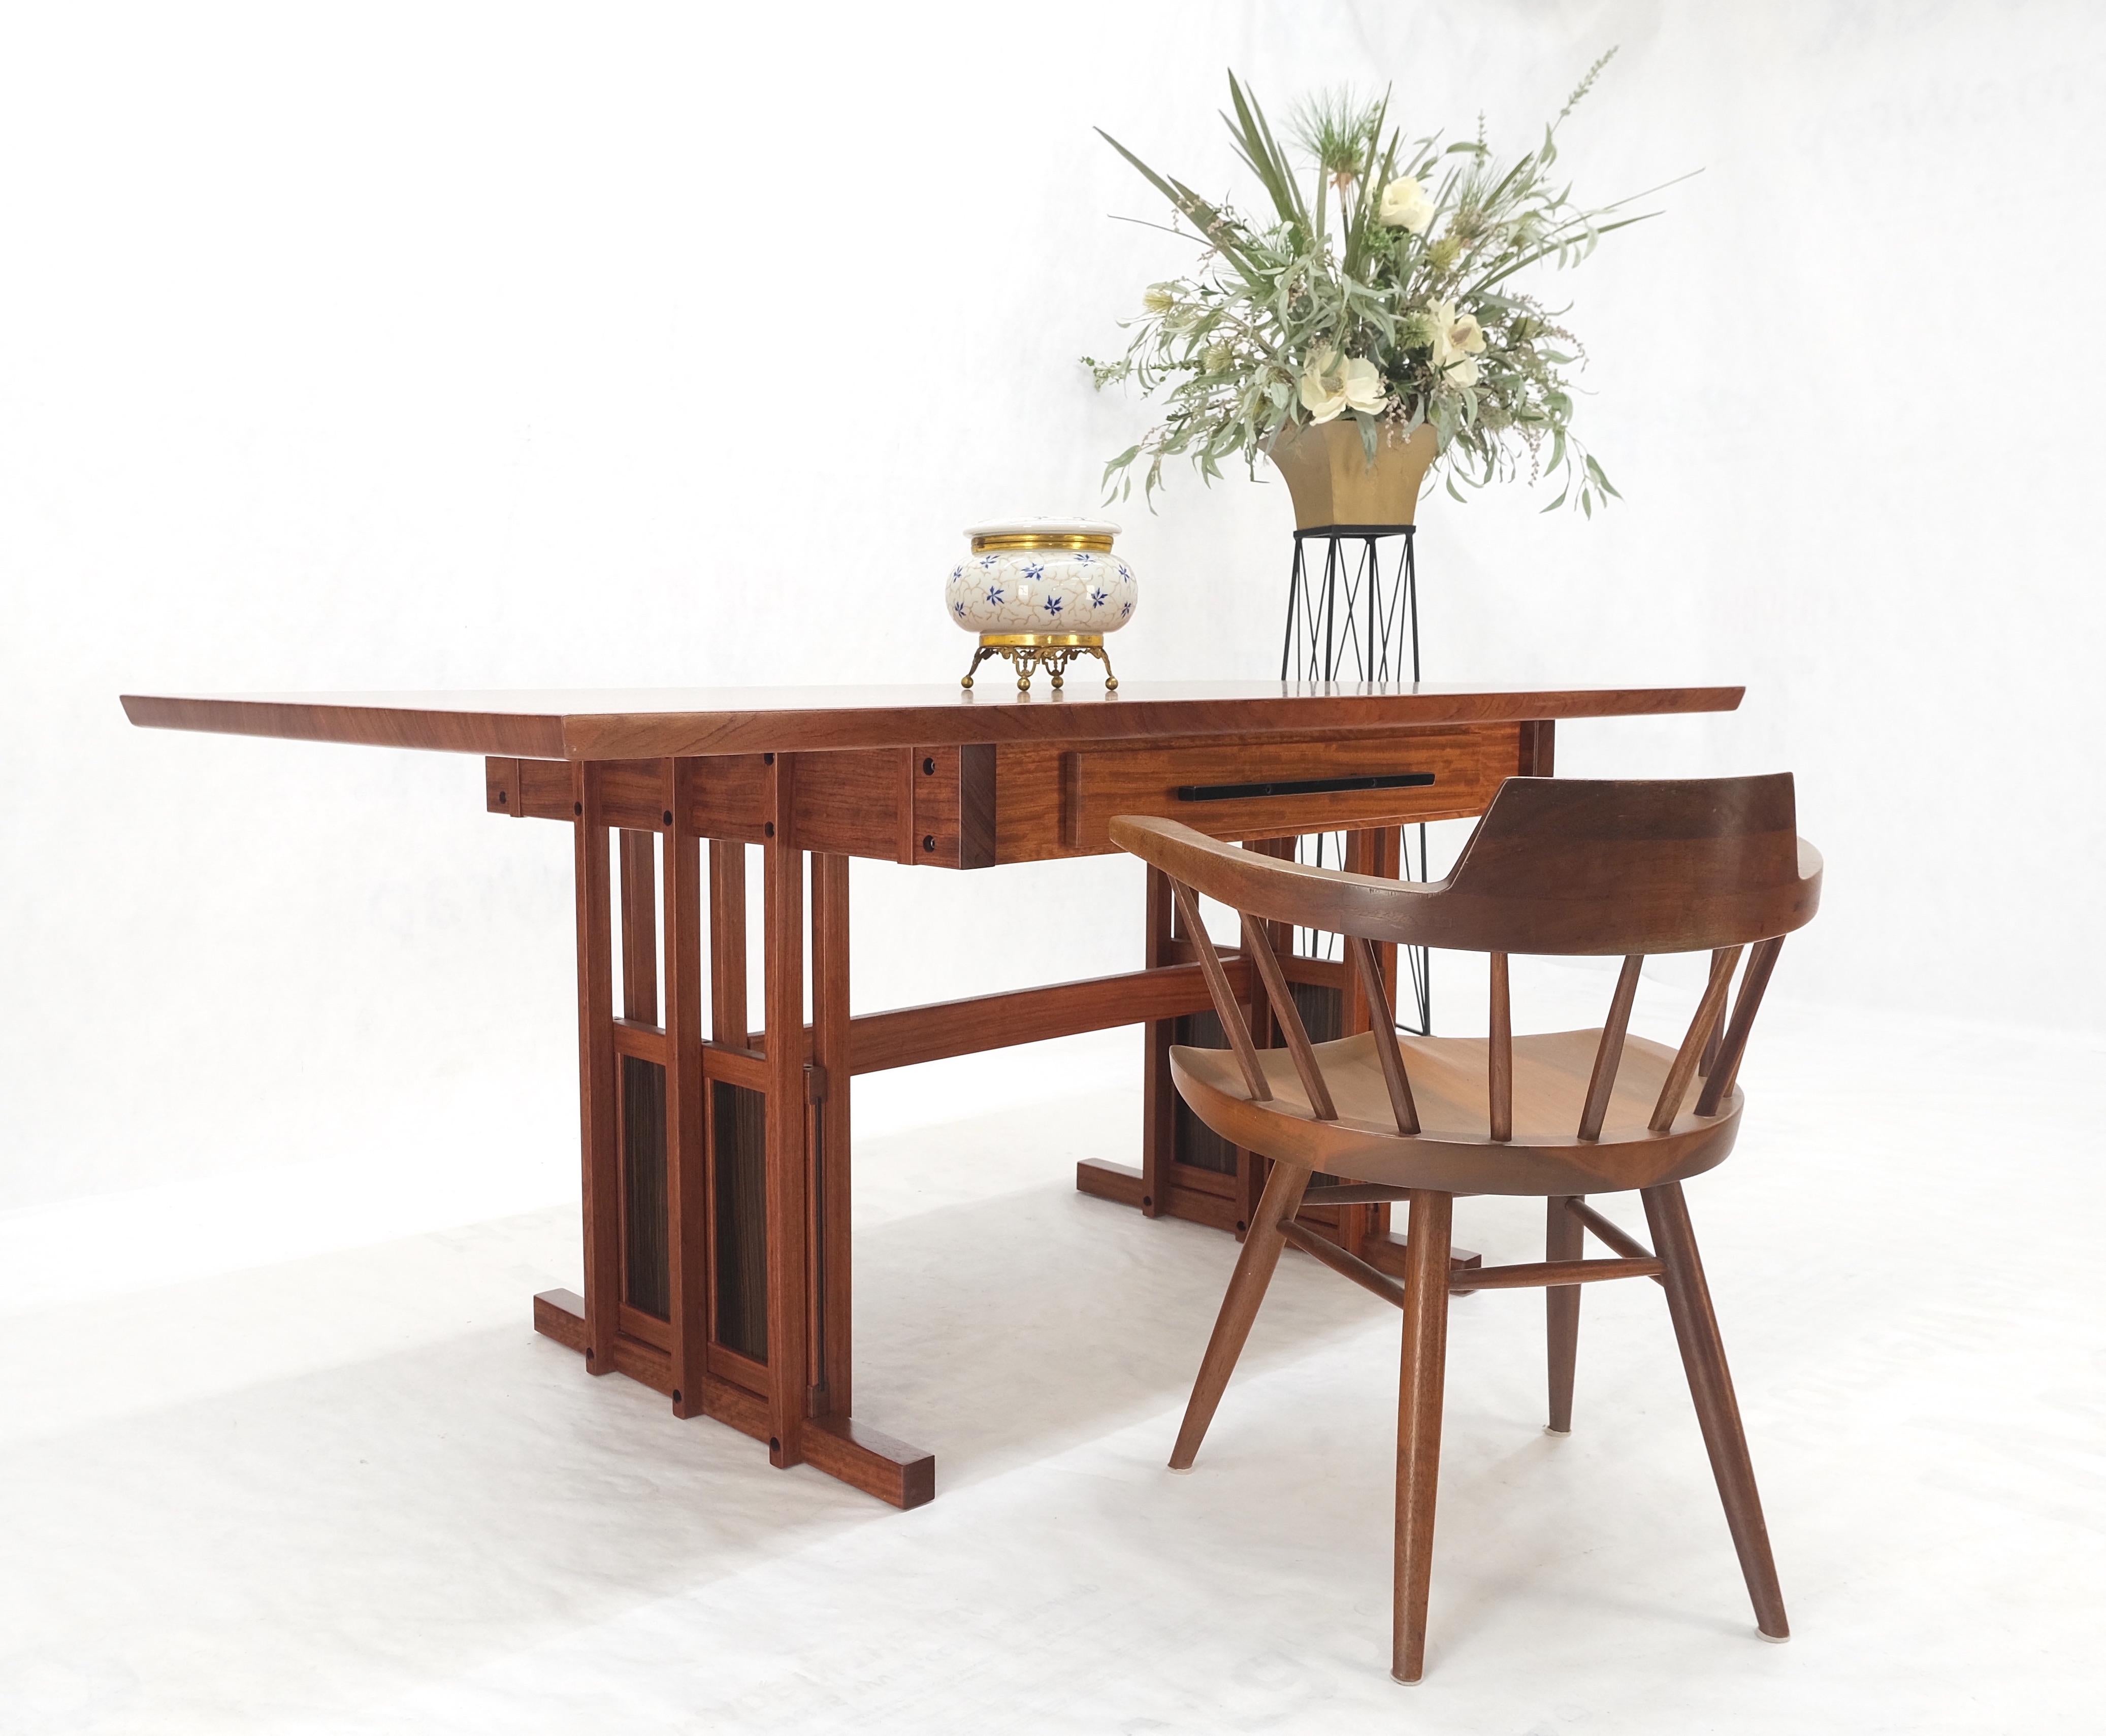 American All Solid Teak Top and Base Architectural Studio Made Partners Desk Mint! For Sale